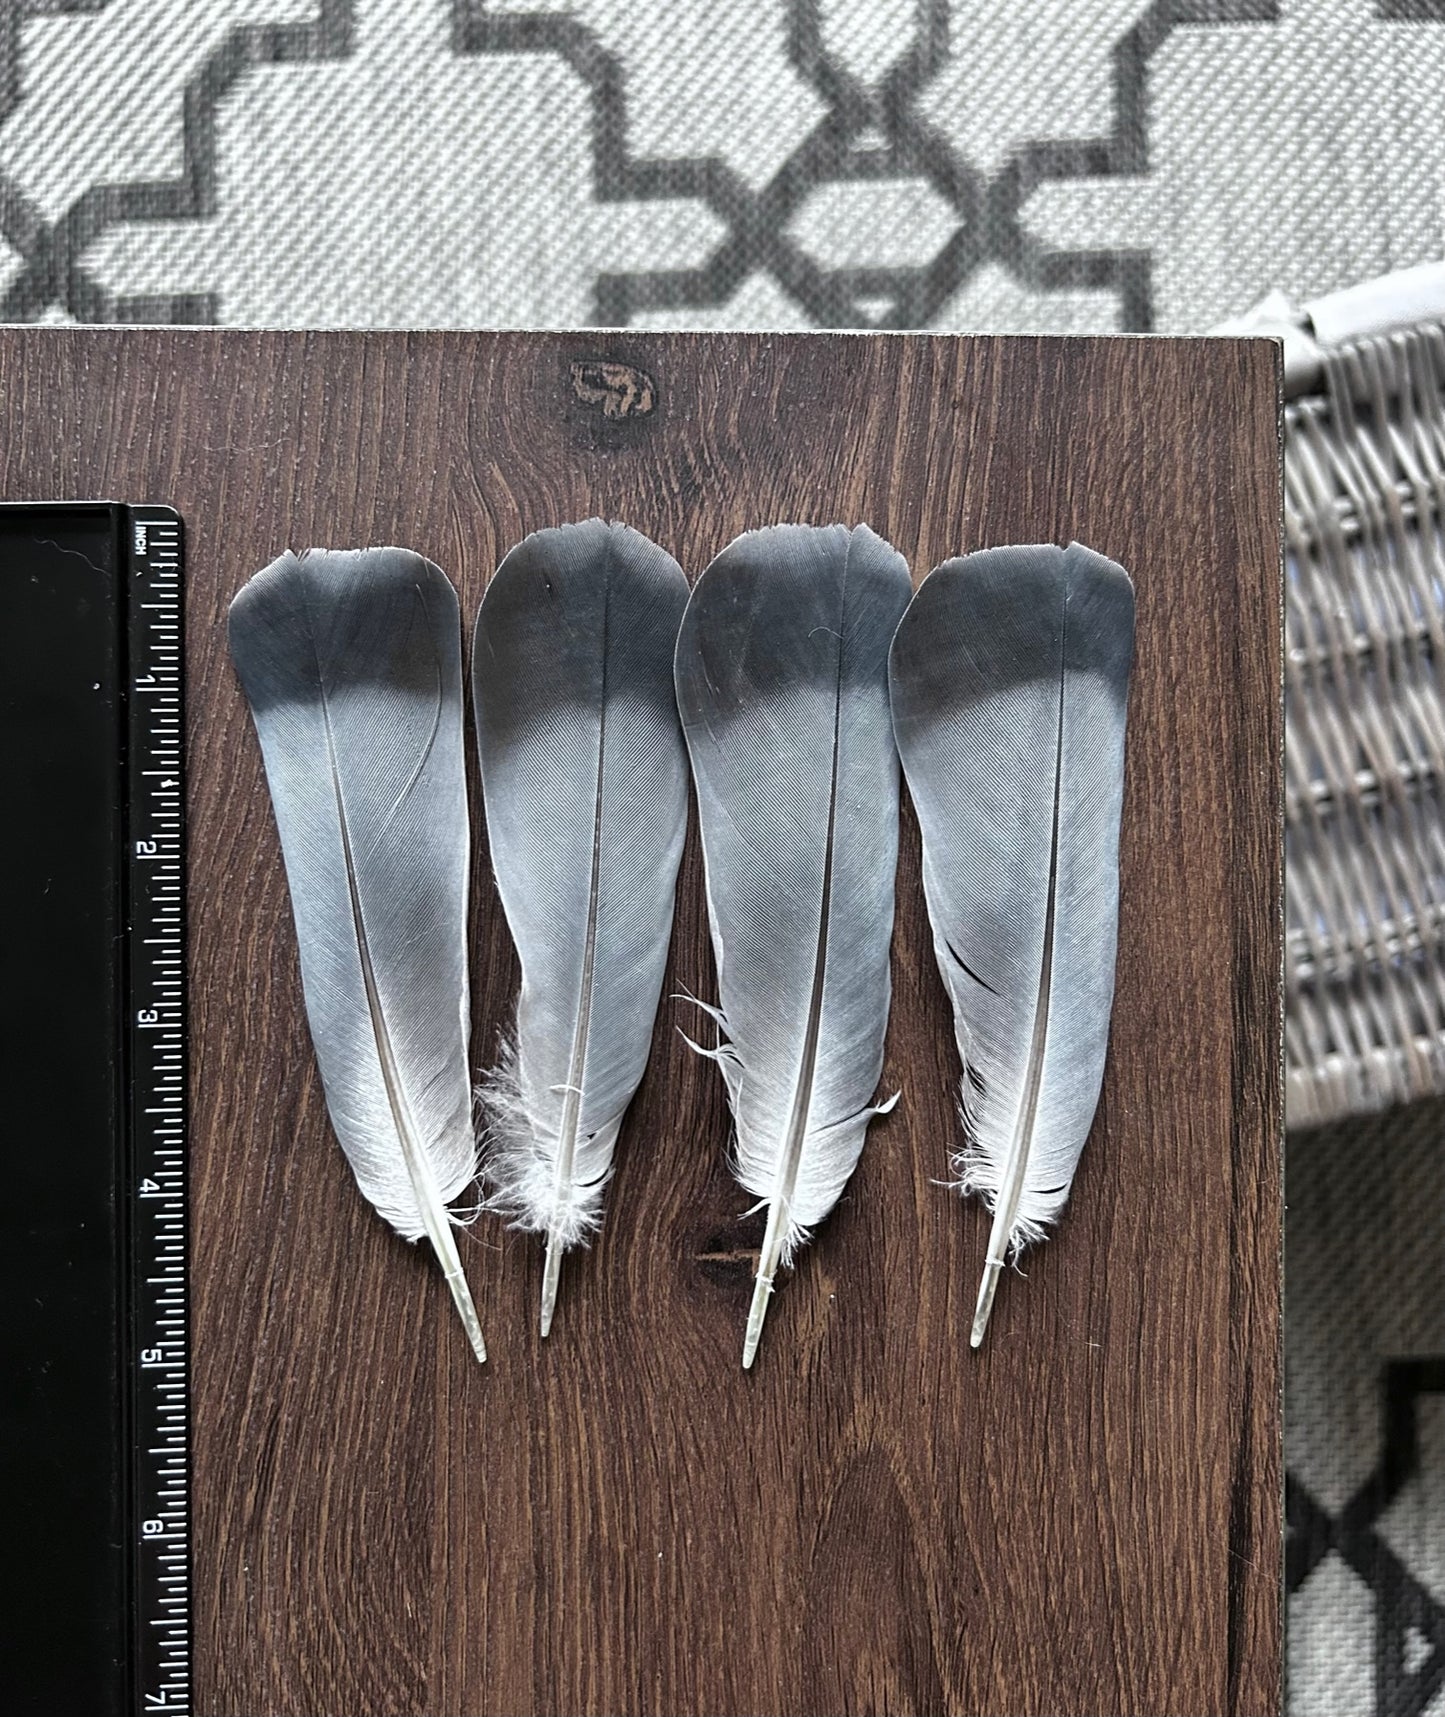 Homing Pigeon Tail Feathers